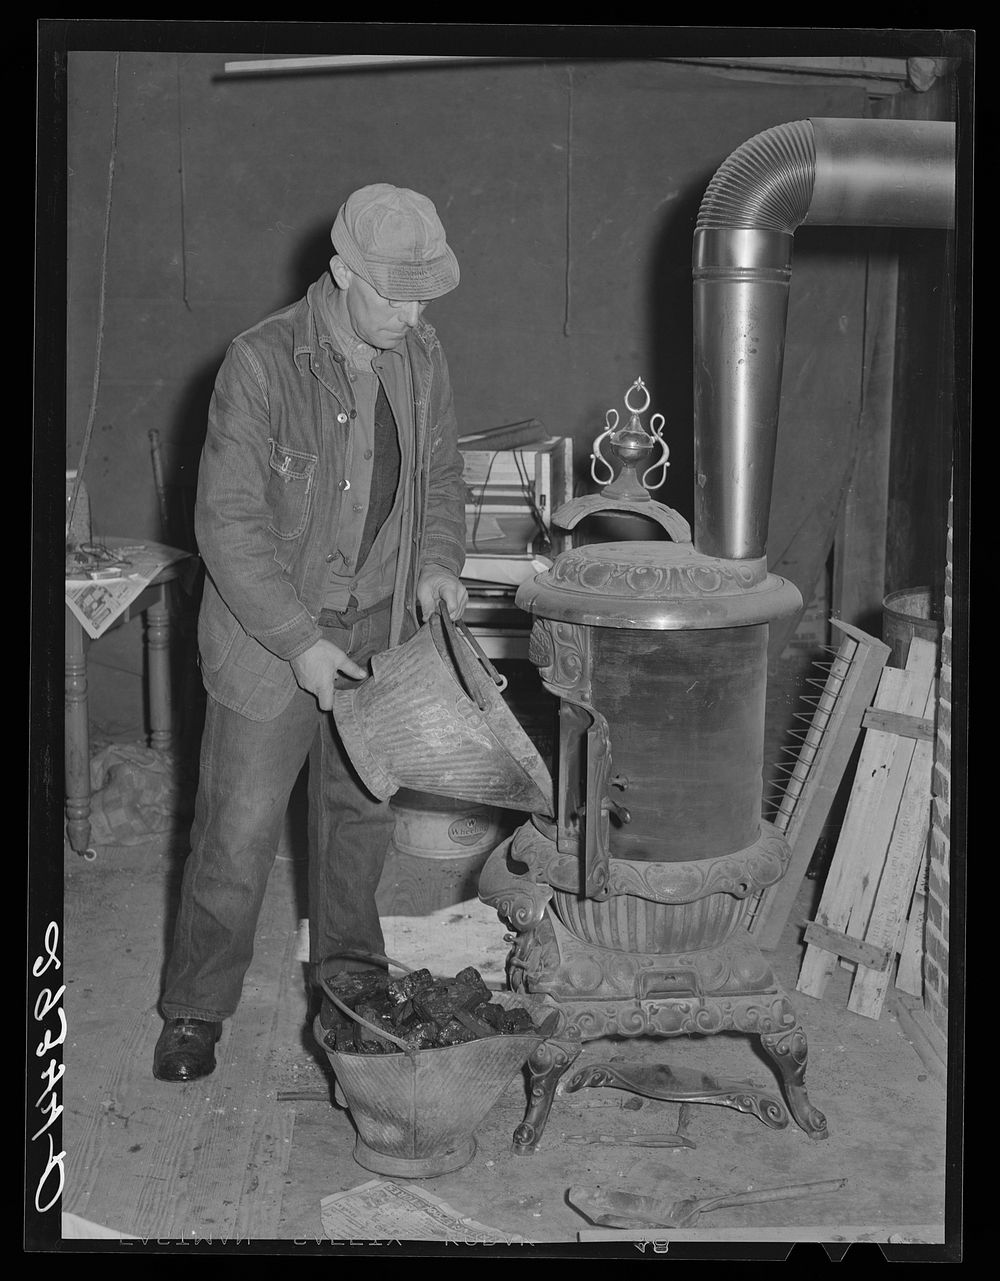 O.G. Haubeil emptying coal scuttle into stove. Ross County, Ohio. Sourced from the Library of Congress.